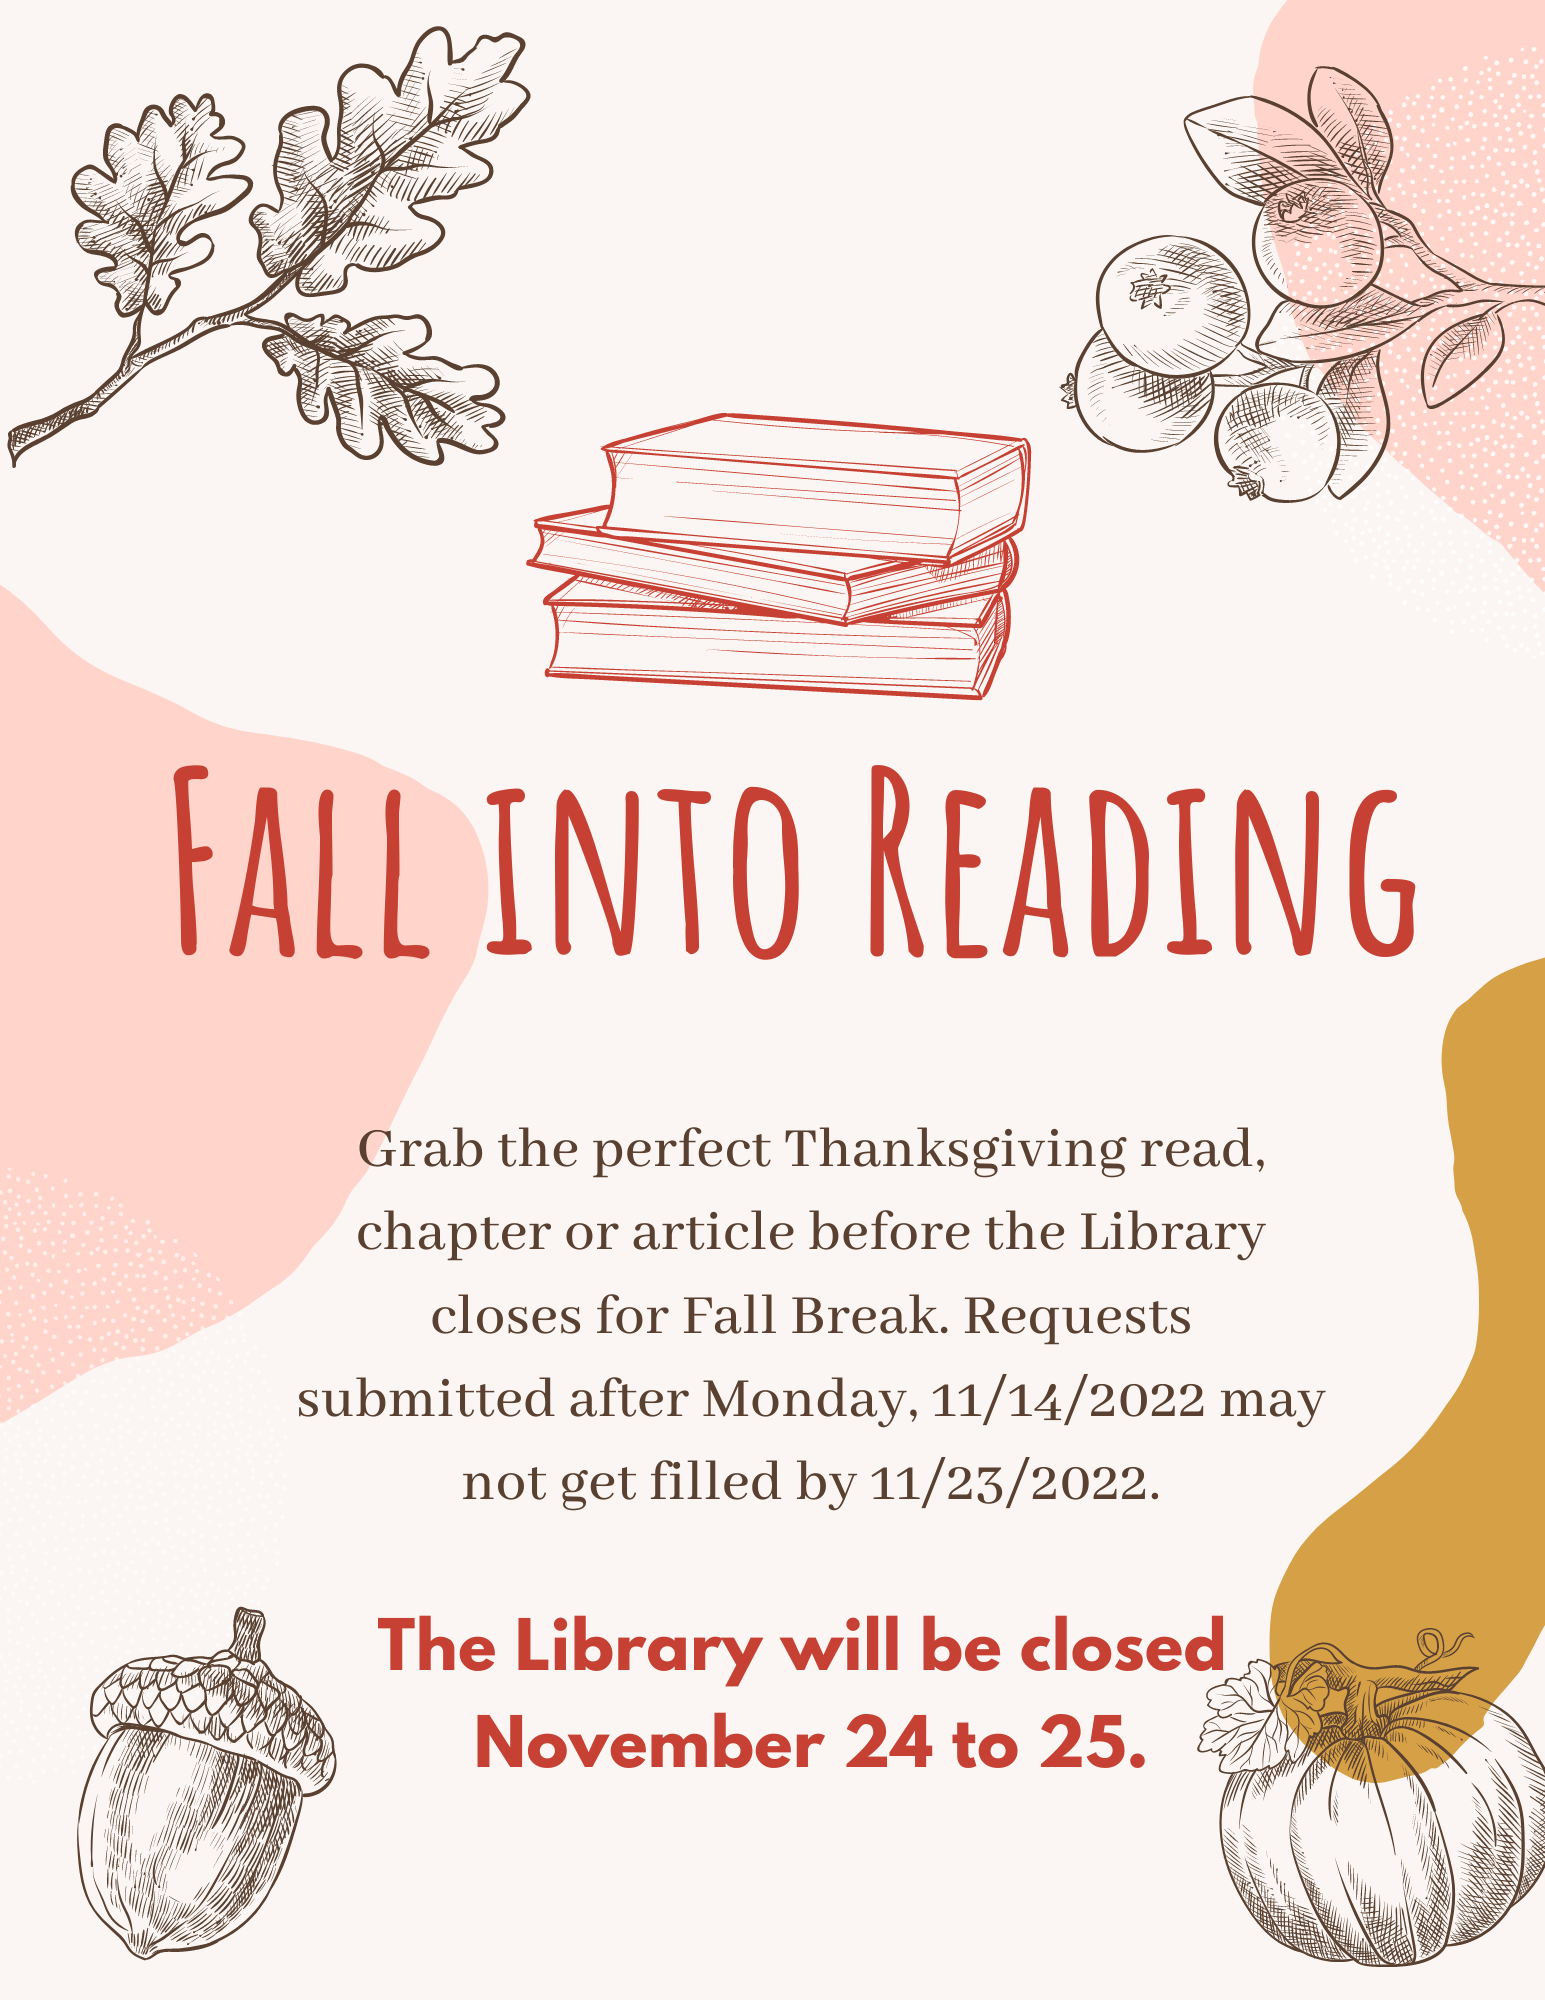 Fall into reading. Grab the perfect Thanksgiving read, chapter or article before the Library closes for Fall Break. Requests submitted after Monday, 11/14/2022 may not get filled by 11/23/2022. The Library will be closed November 24 to 25.